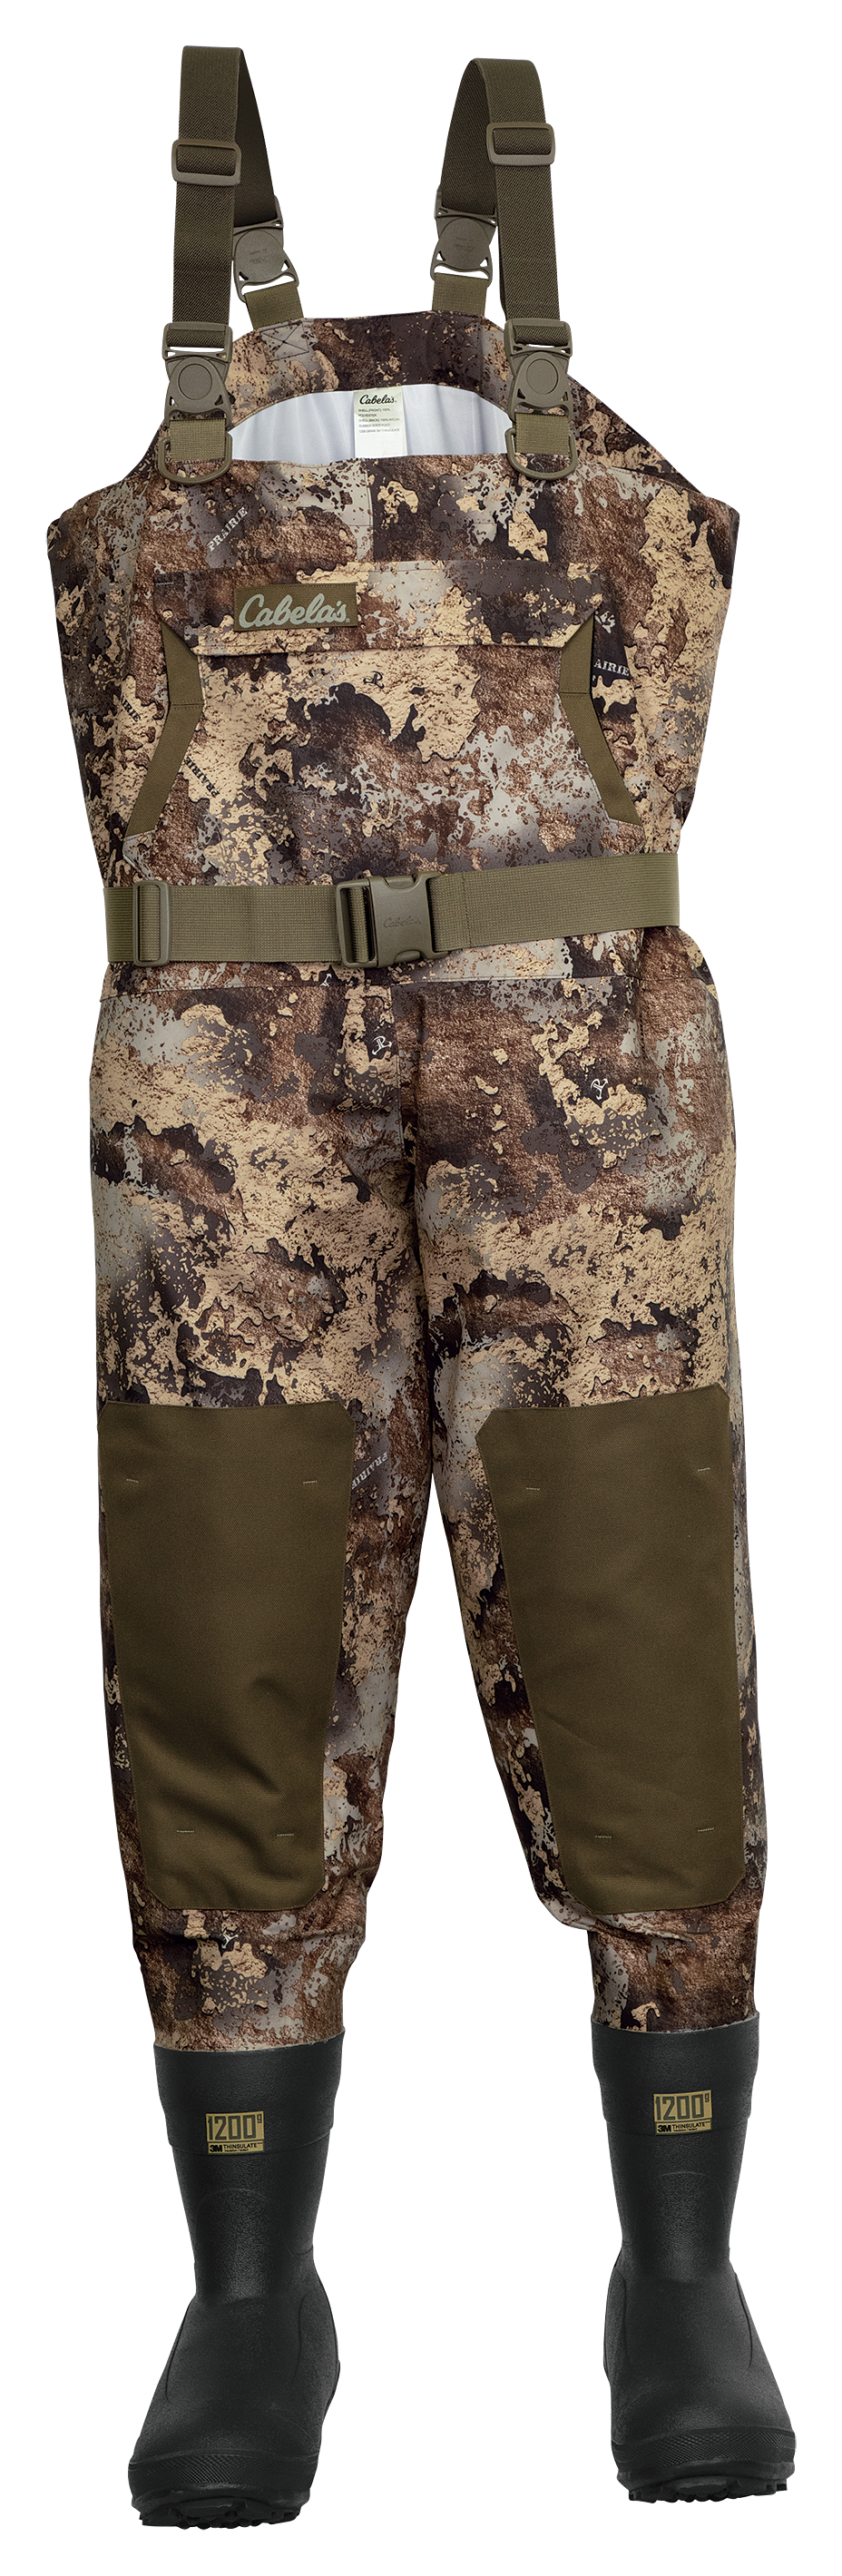 Cabela's Ultimate Hunting Chest Waders Testimonial 2012_H264.mov 